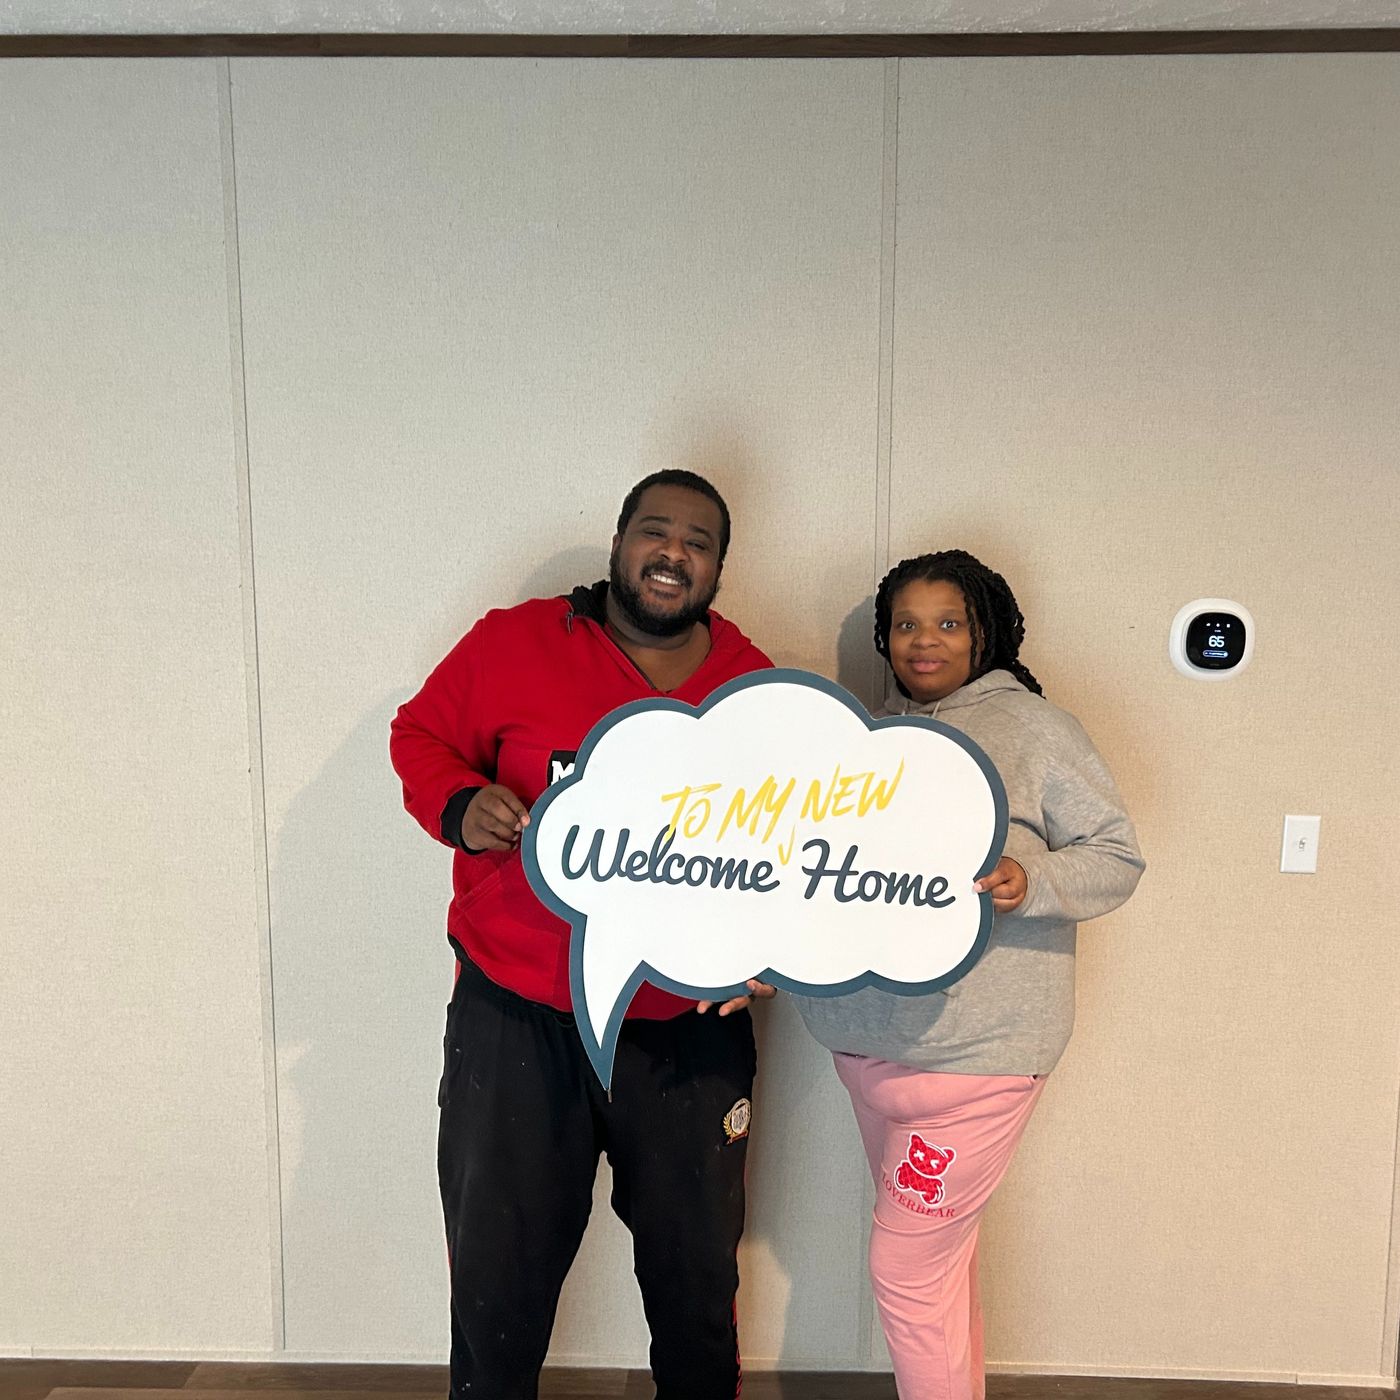 TIFFANY H. welcome home image